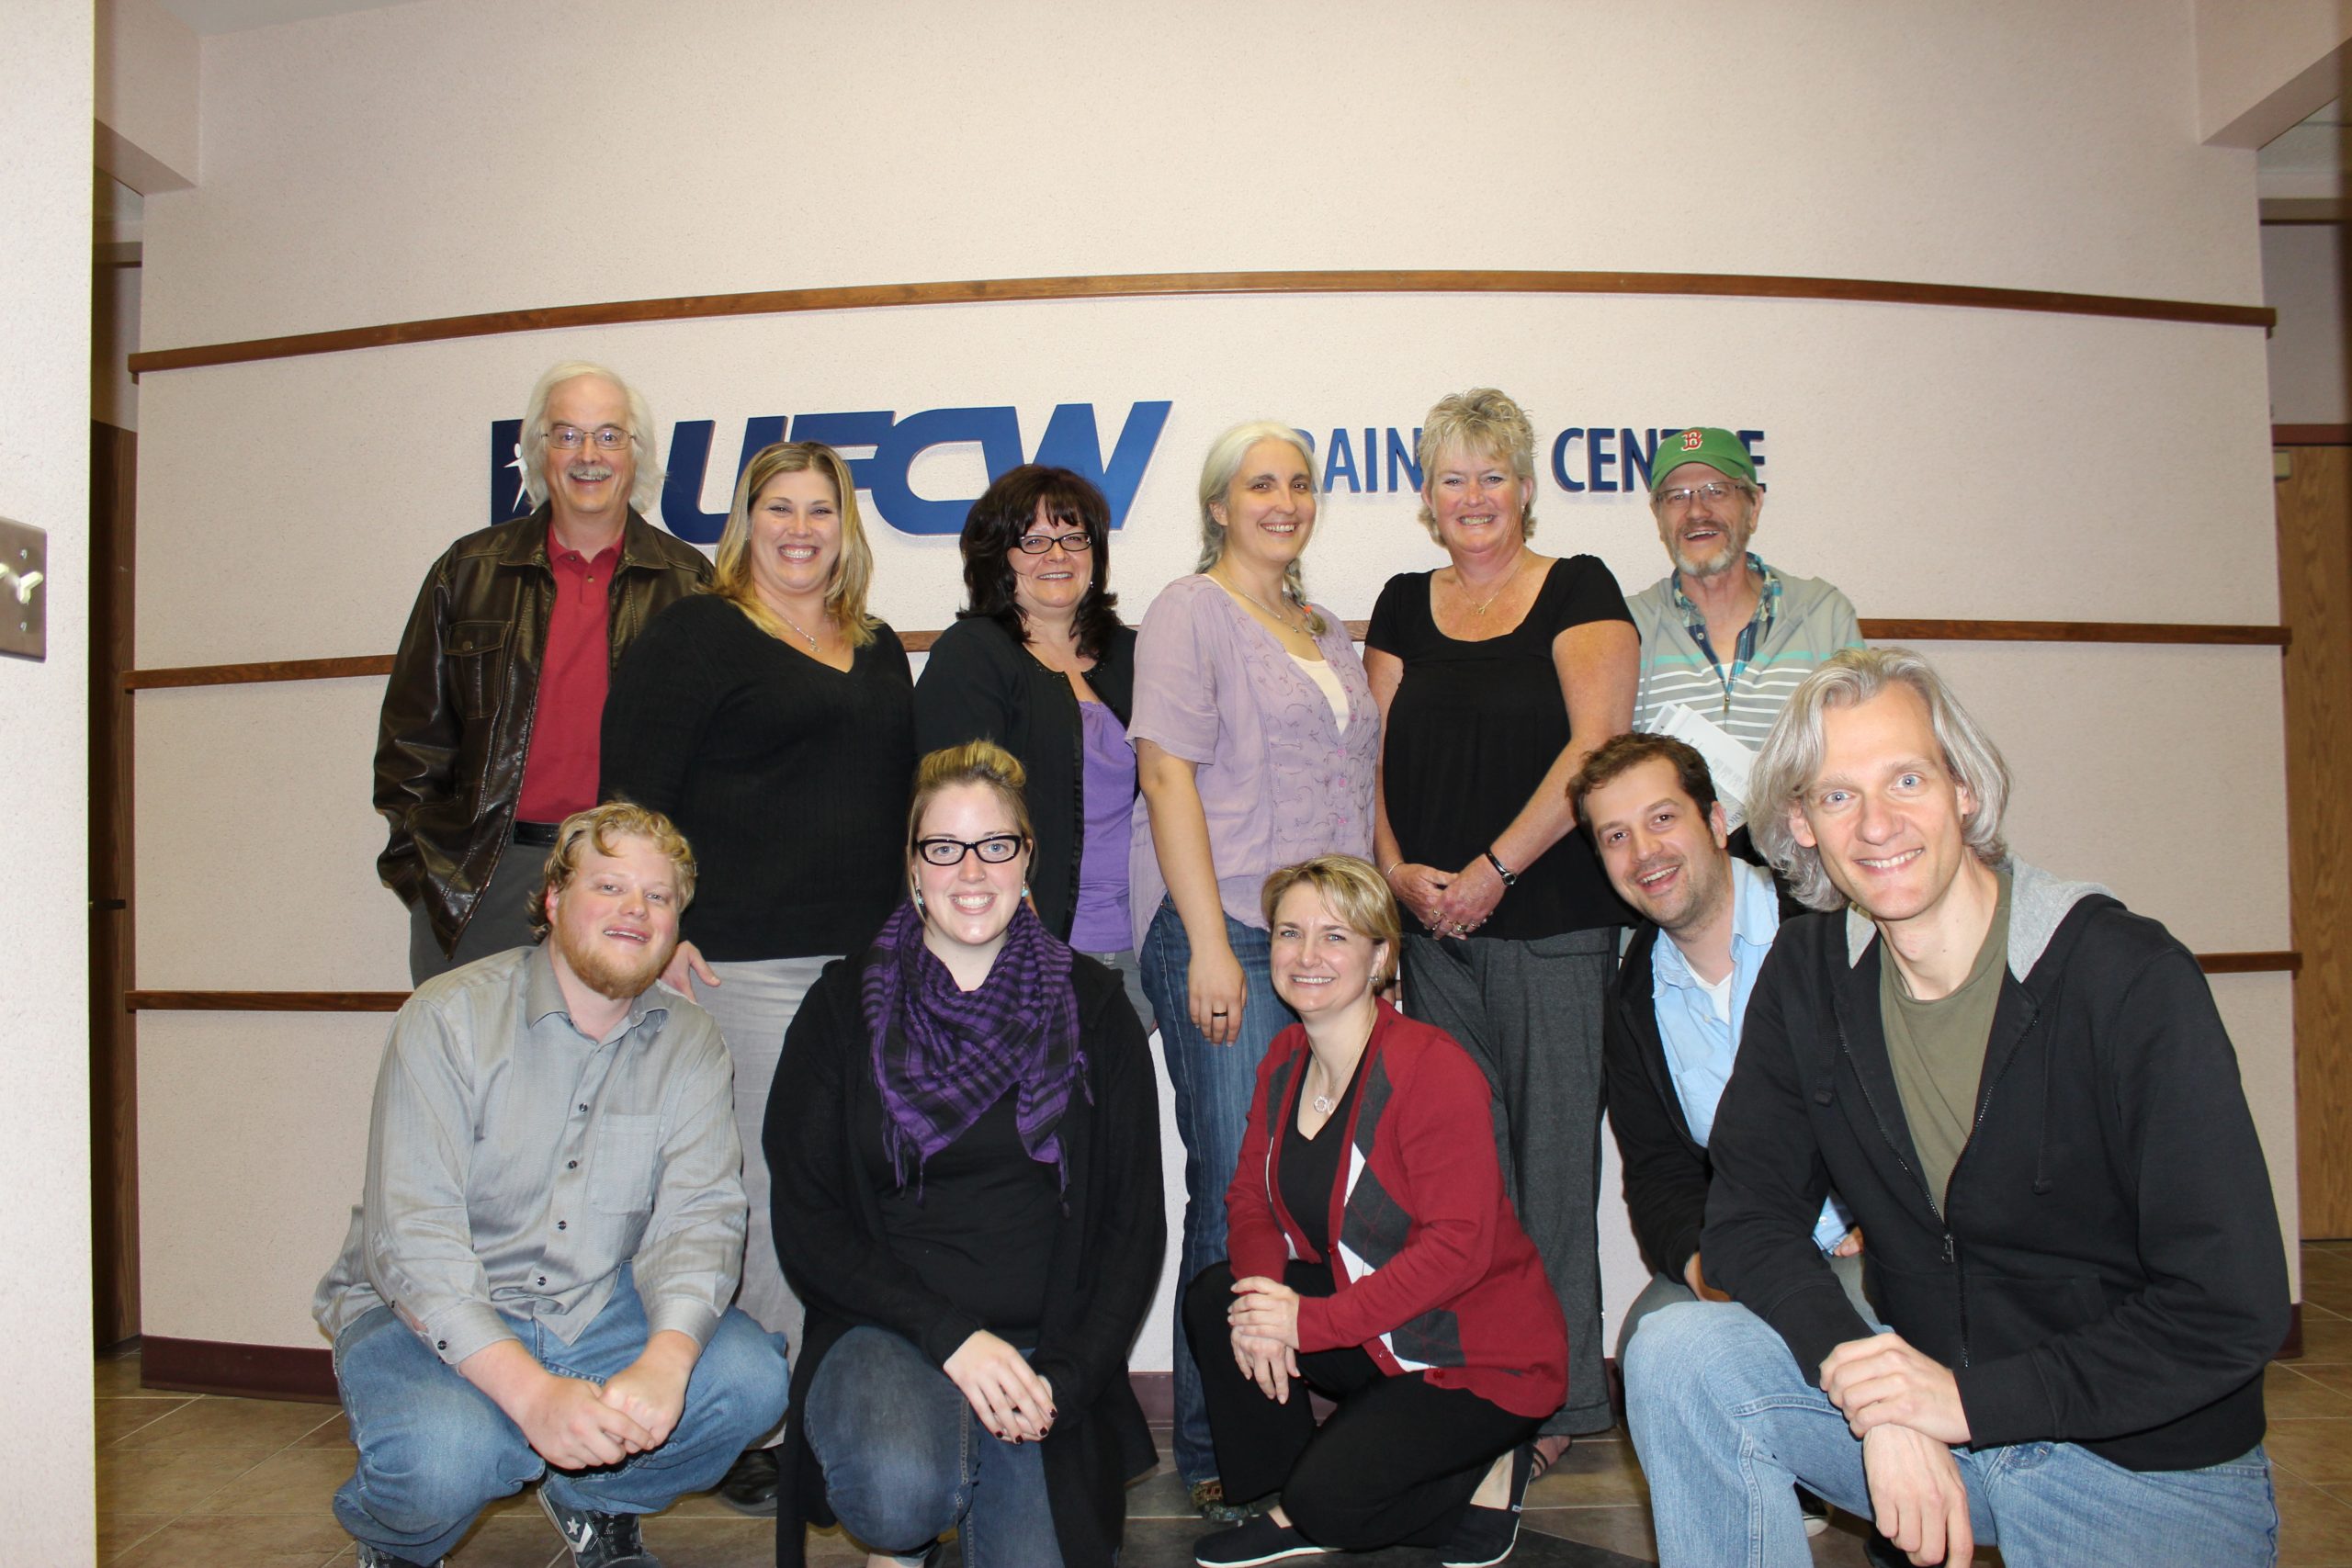 UFCW Local 832 Workshop Group photo at the UFCW training Centre in 2012. 11 people, some crouched down in front of UFCW training centre sign and logo.